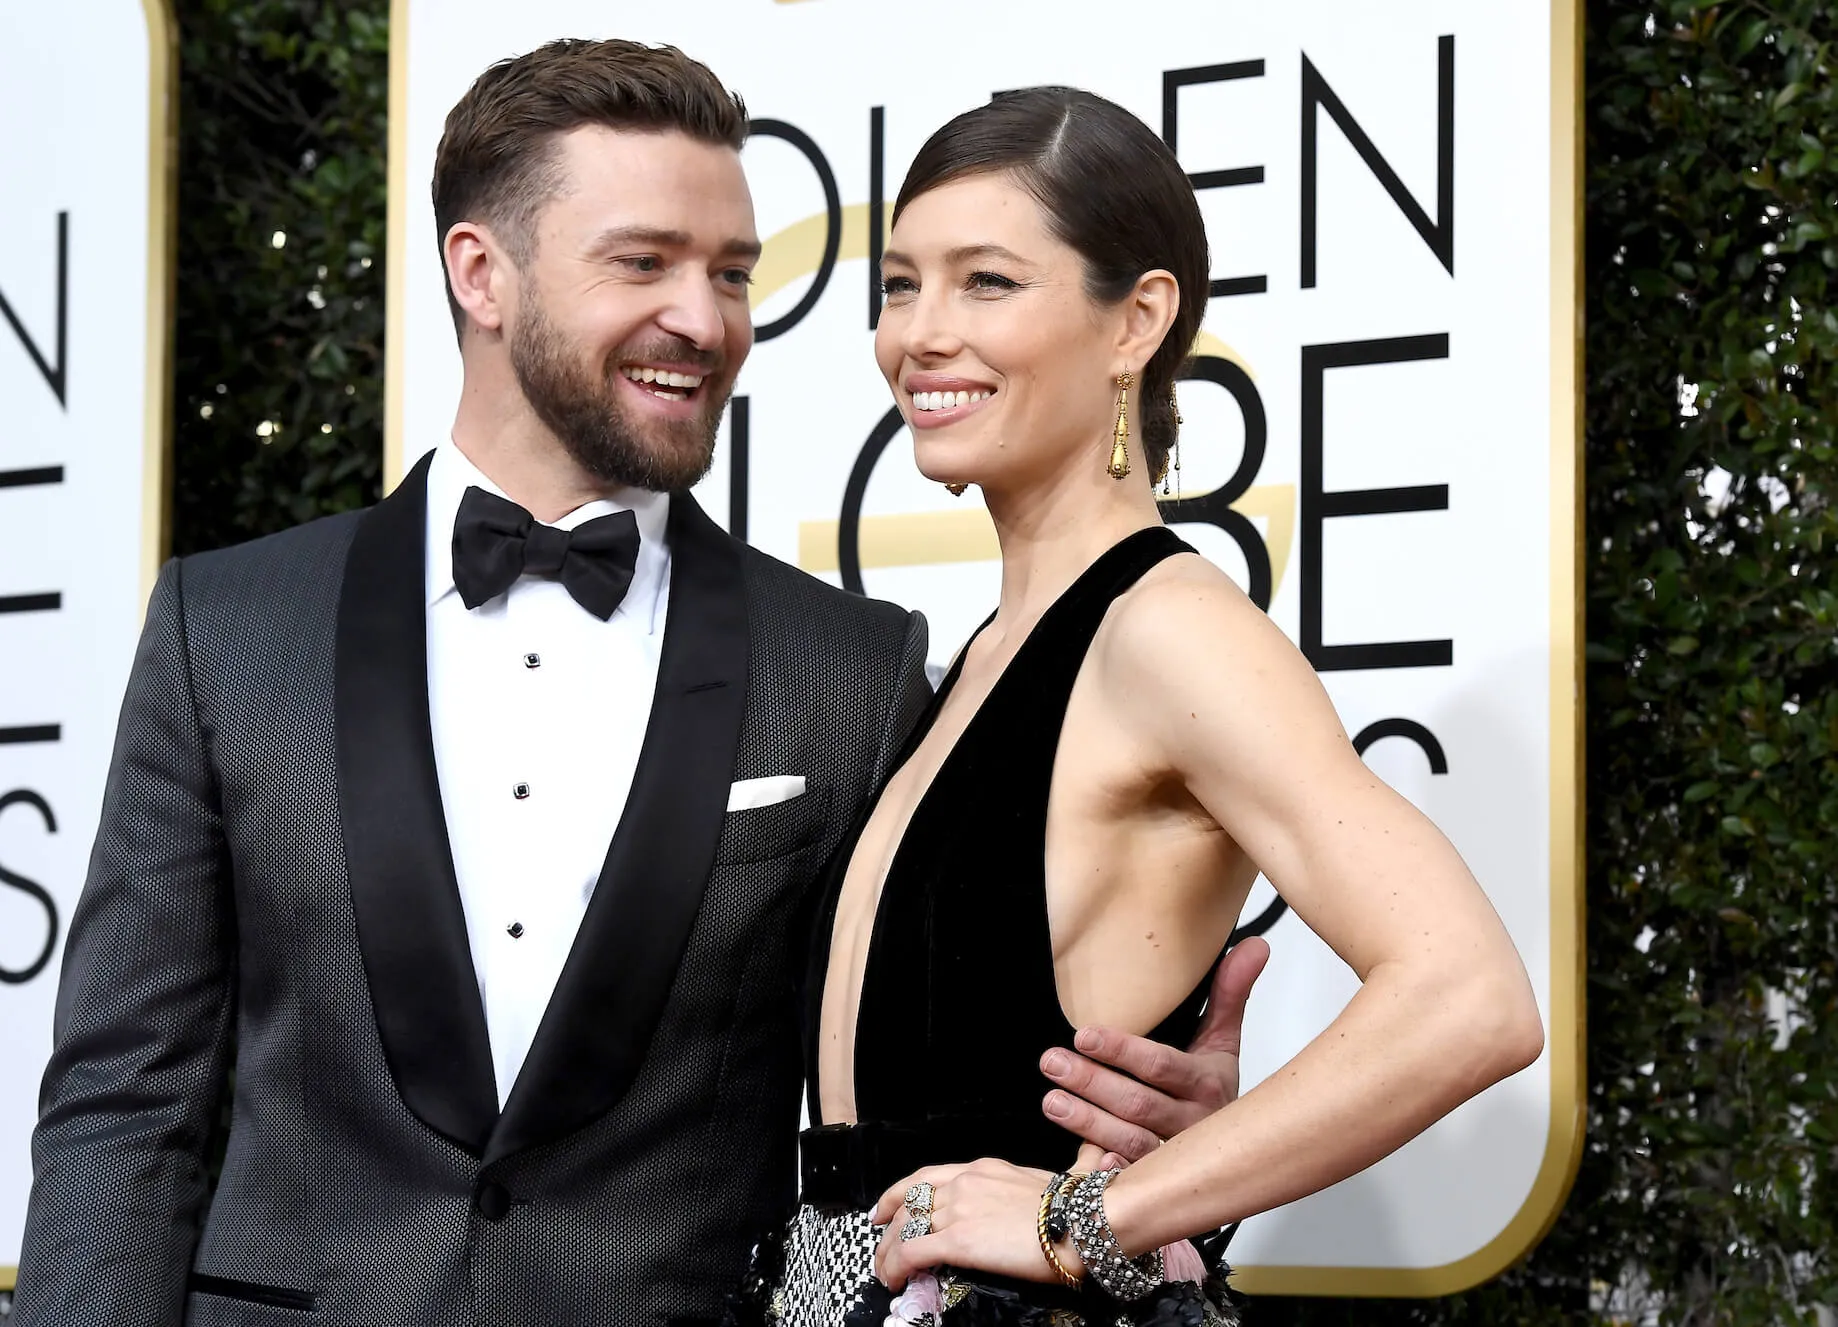 Justin Timberlake and Jessica Biel standing next to each other and smiling at the 74th Annual Golden Globe Awards. Timberlake is wearing a black tuxedo with a bow tie. Biel is wearing a low-cut black dress.